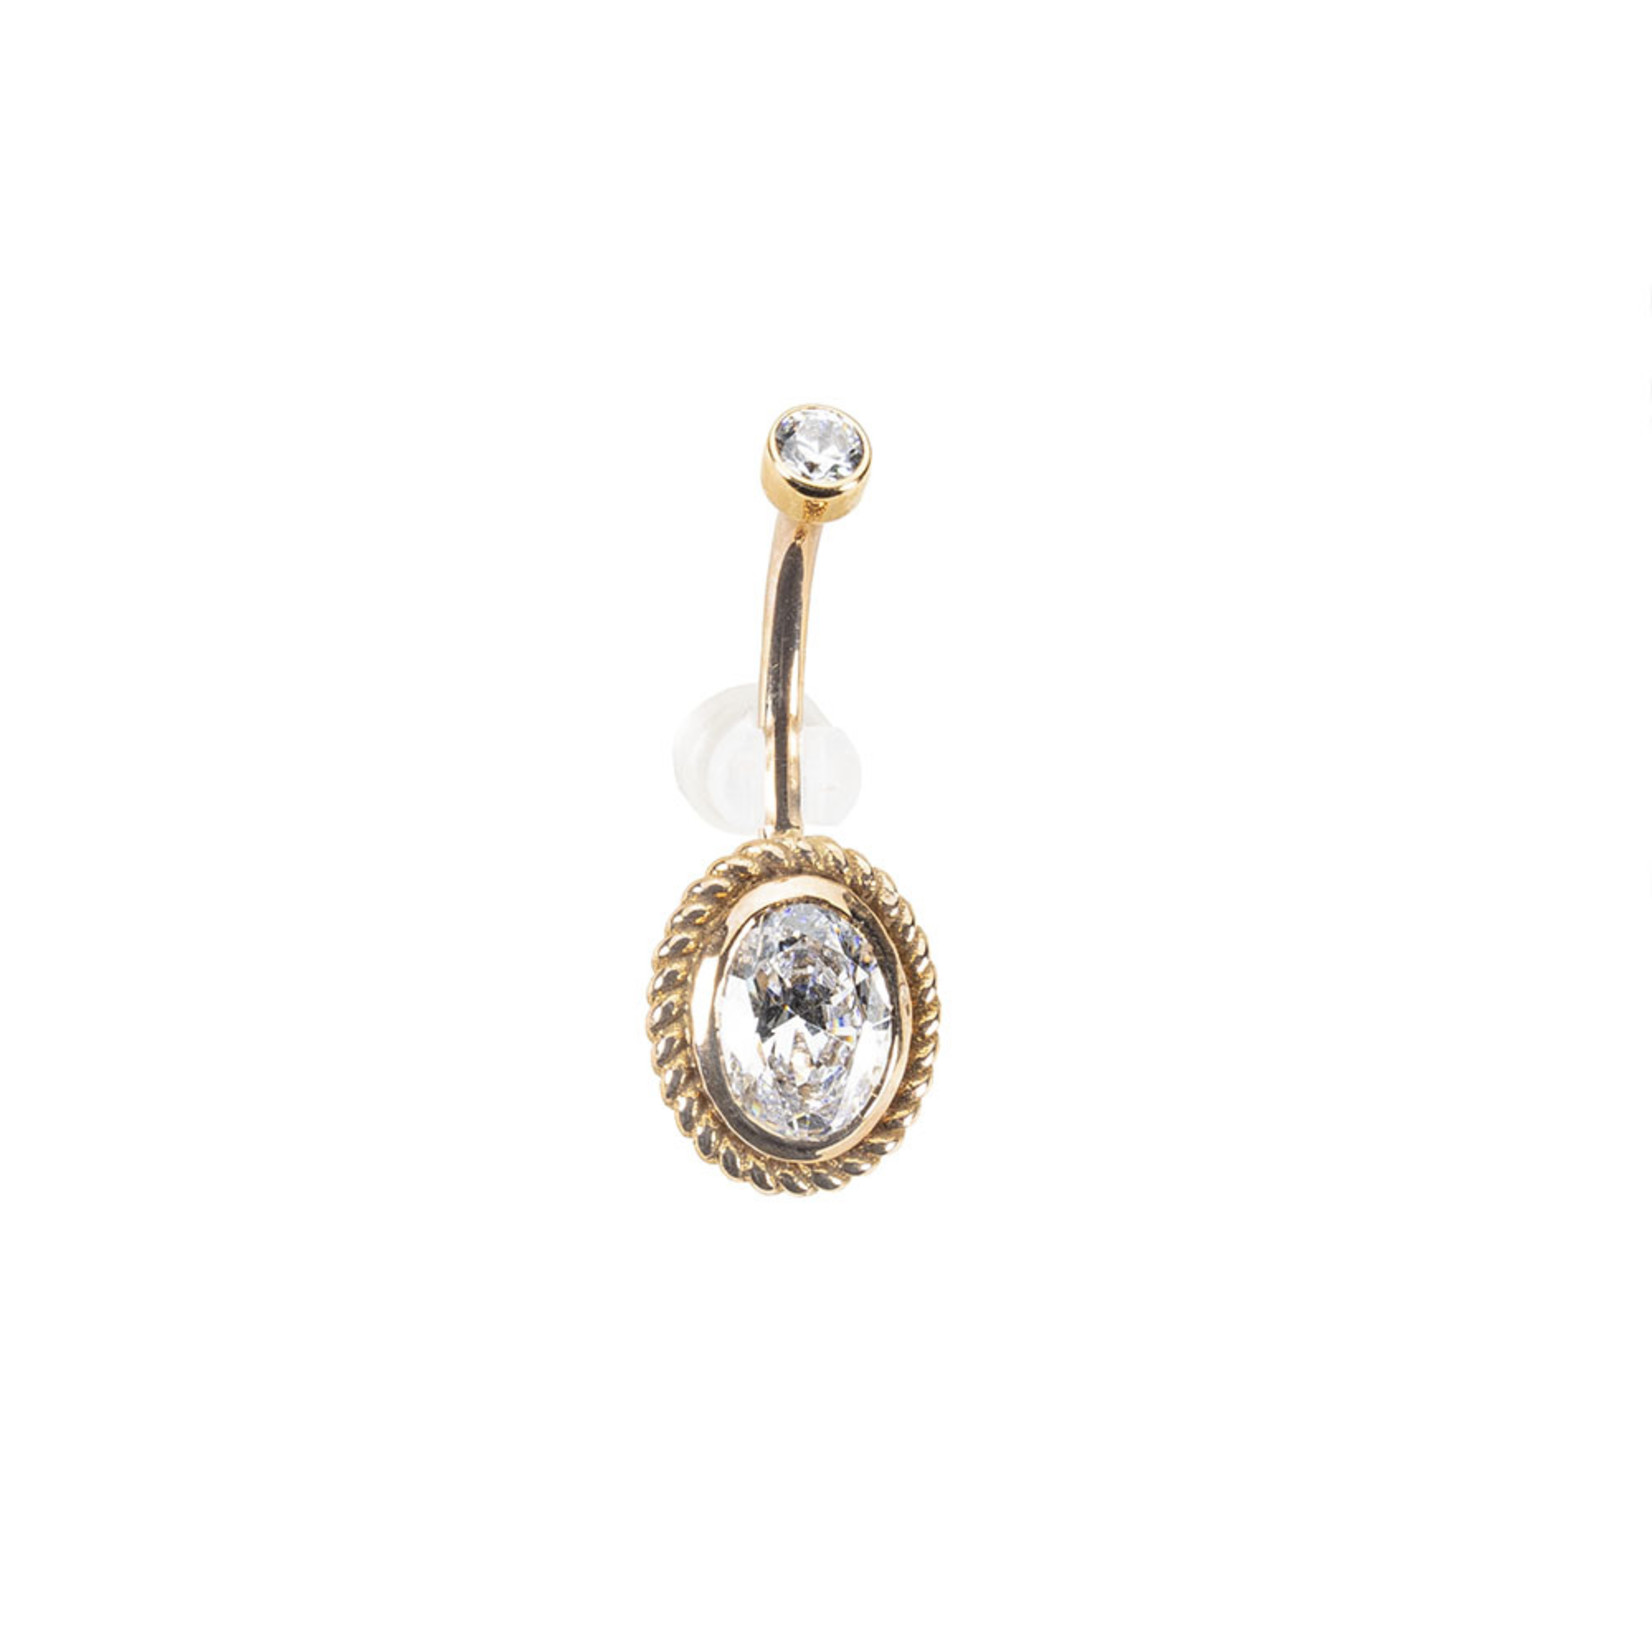 BVLA BVLA 14g 7/16 rose gold "Oval Choctaw" navel curve with CZ